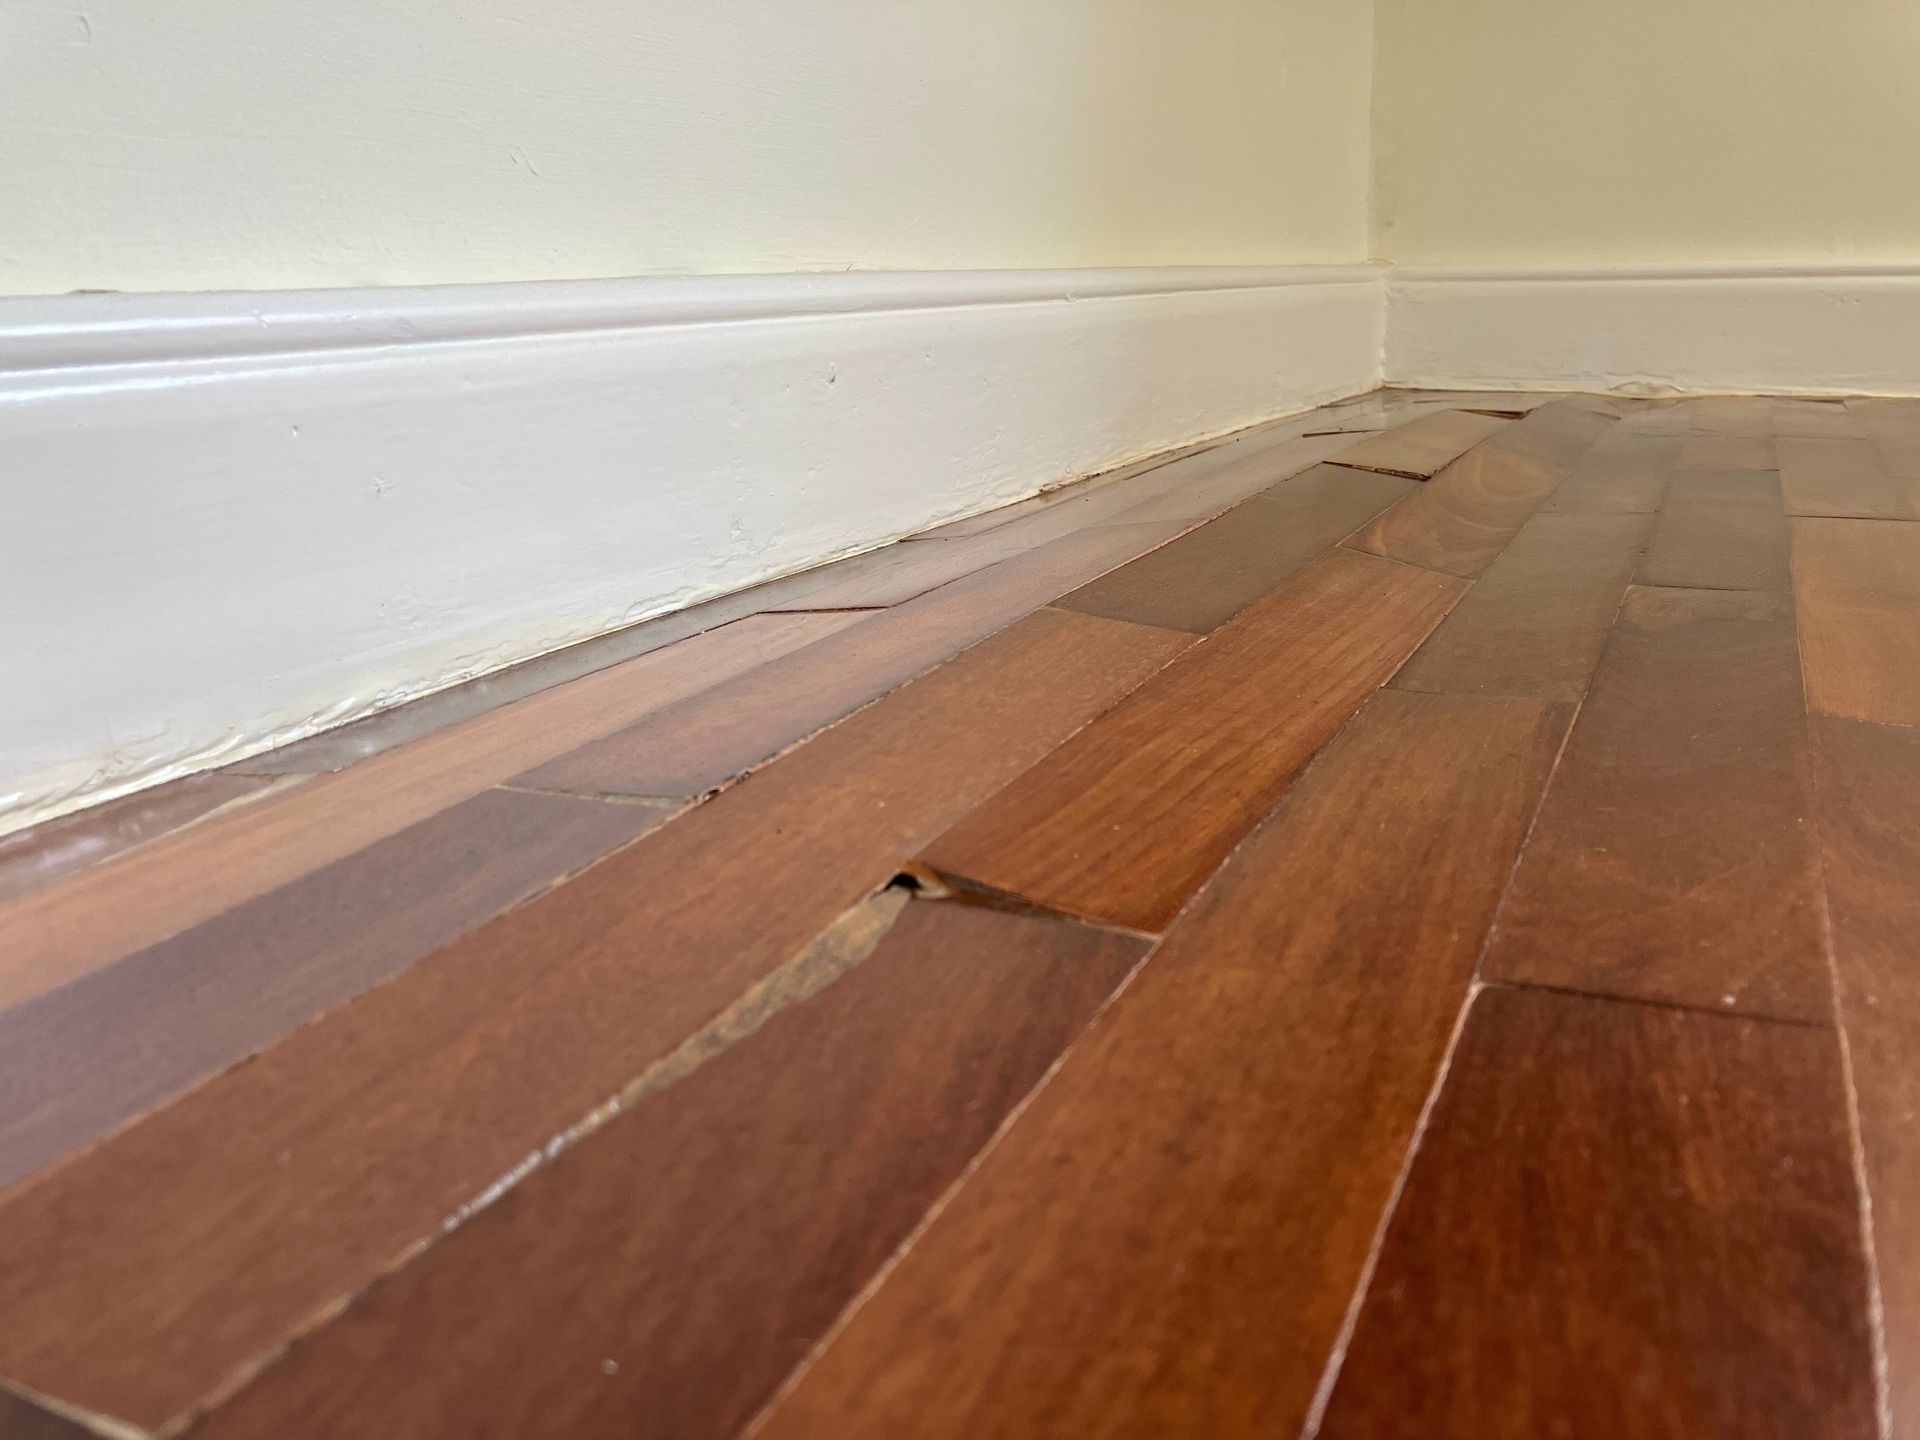 a close up of a wooden floor in a room .